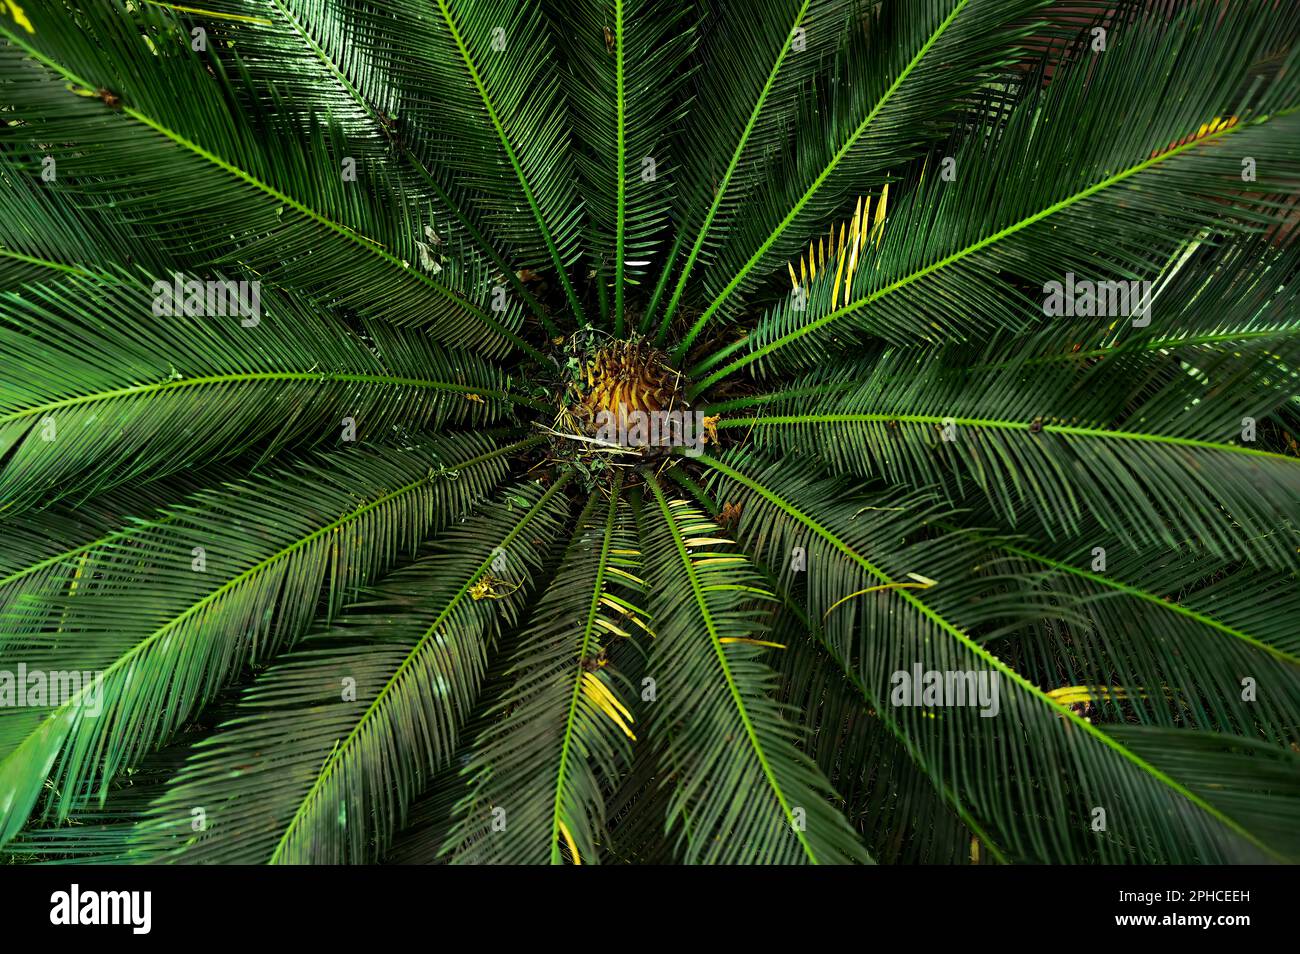 Cycas plant top angle view. Cycas plants are valued for their ornamental foliage and have been used in landscaping, indoor and horticulture. Stock Photo